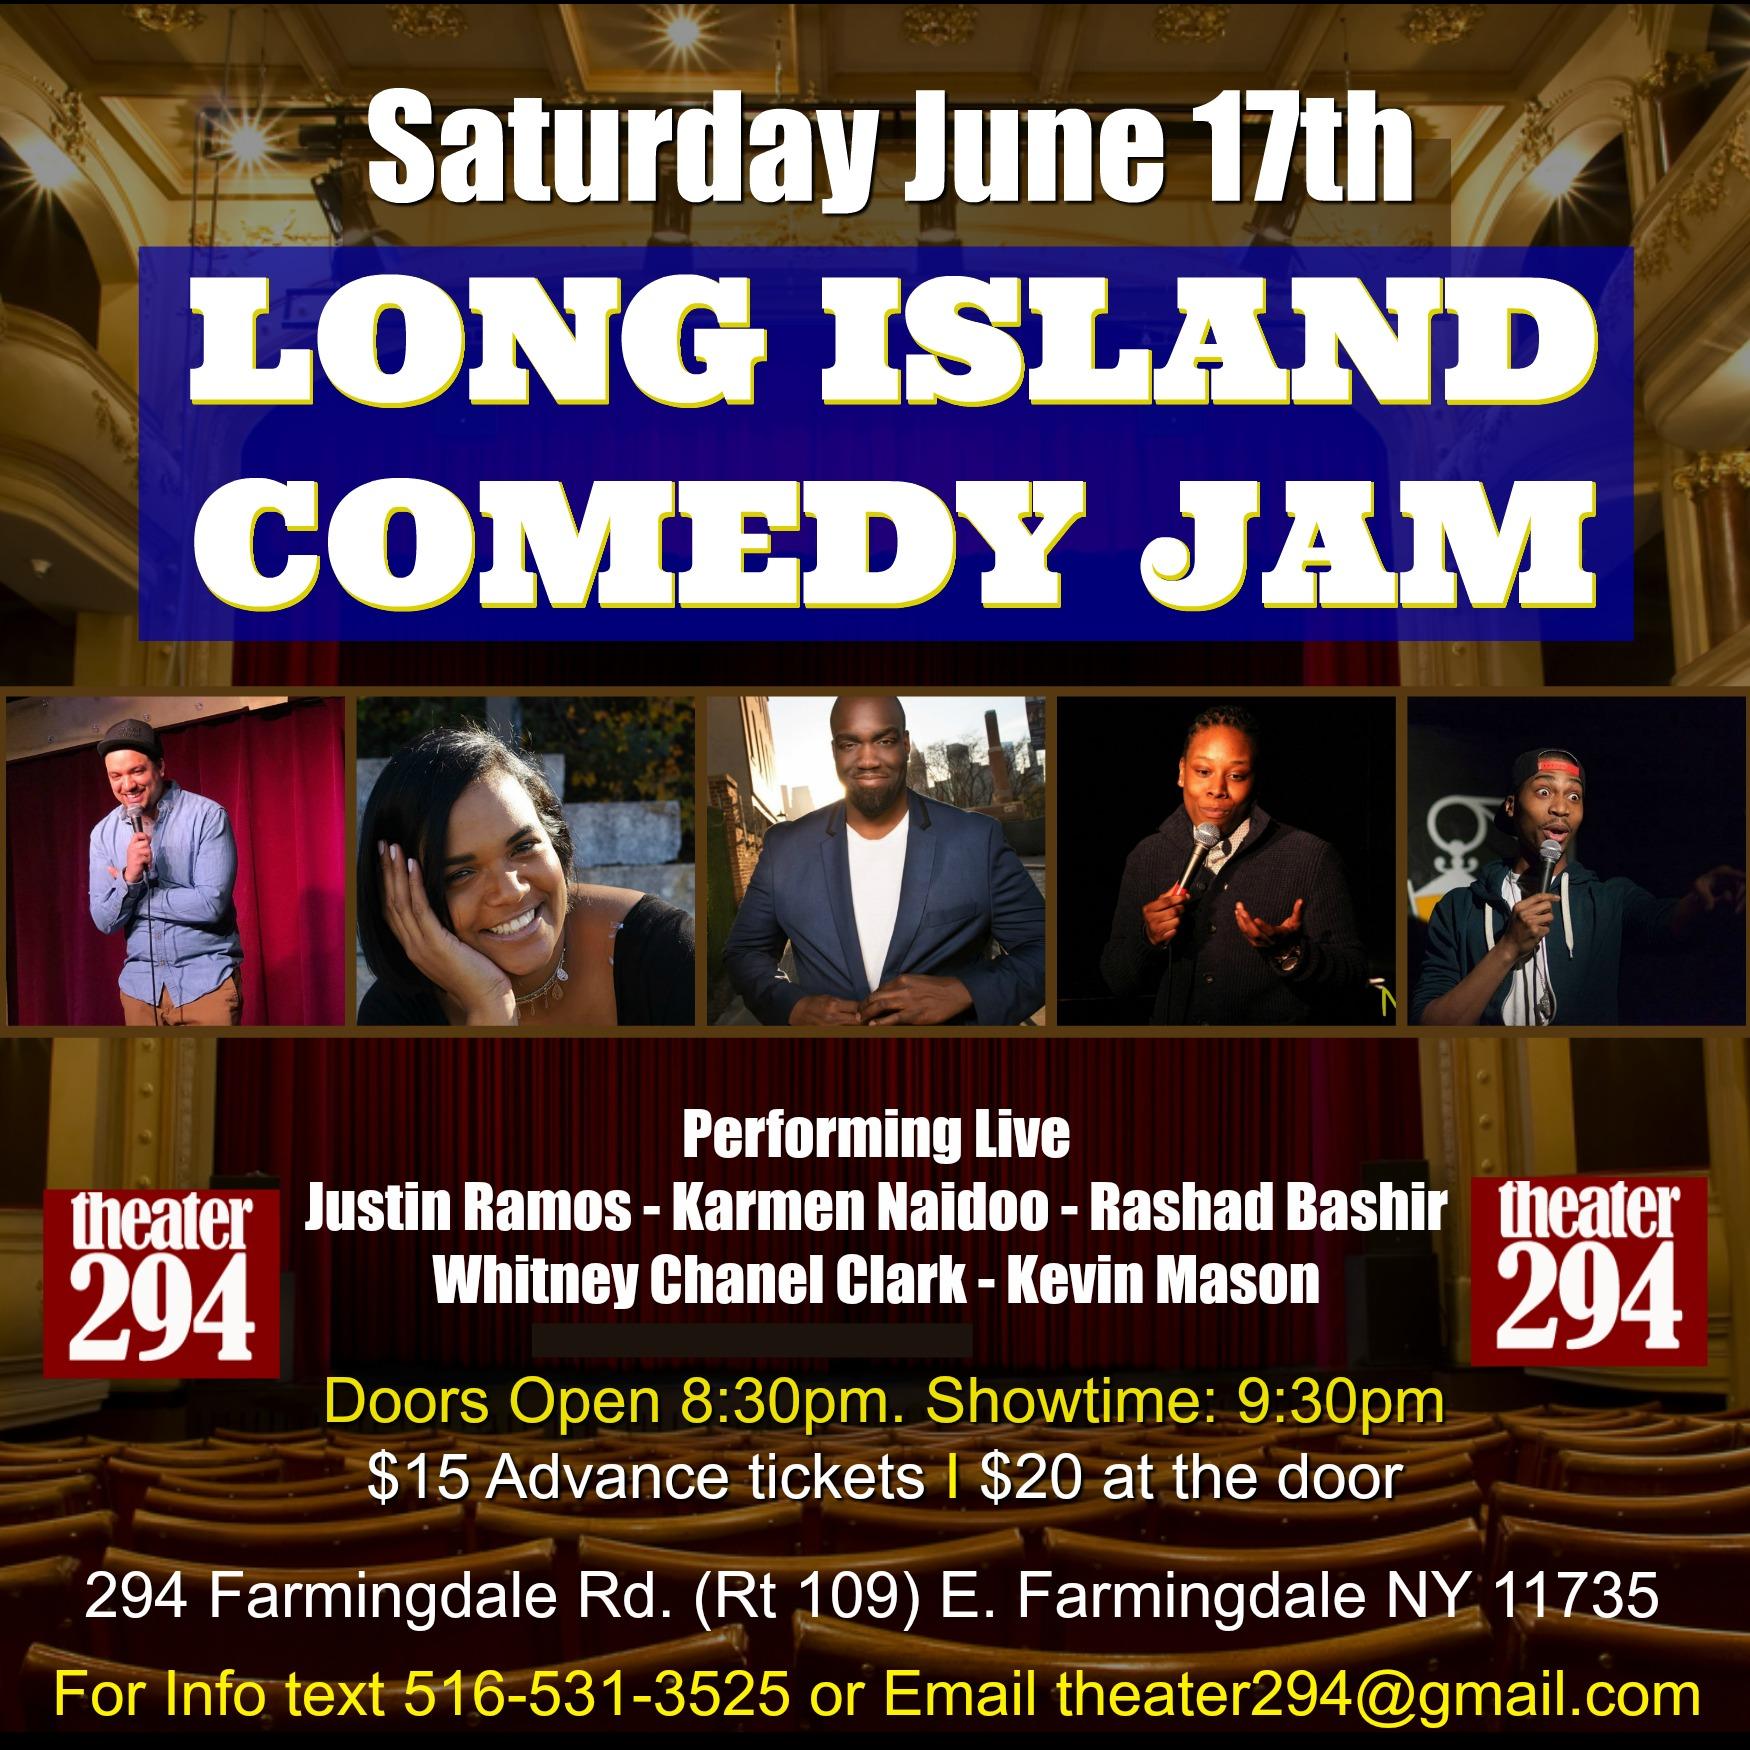 Comedy Jam with Justin Ramos & Friends